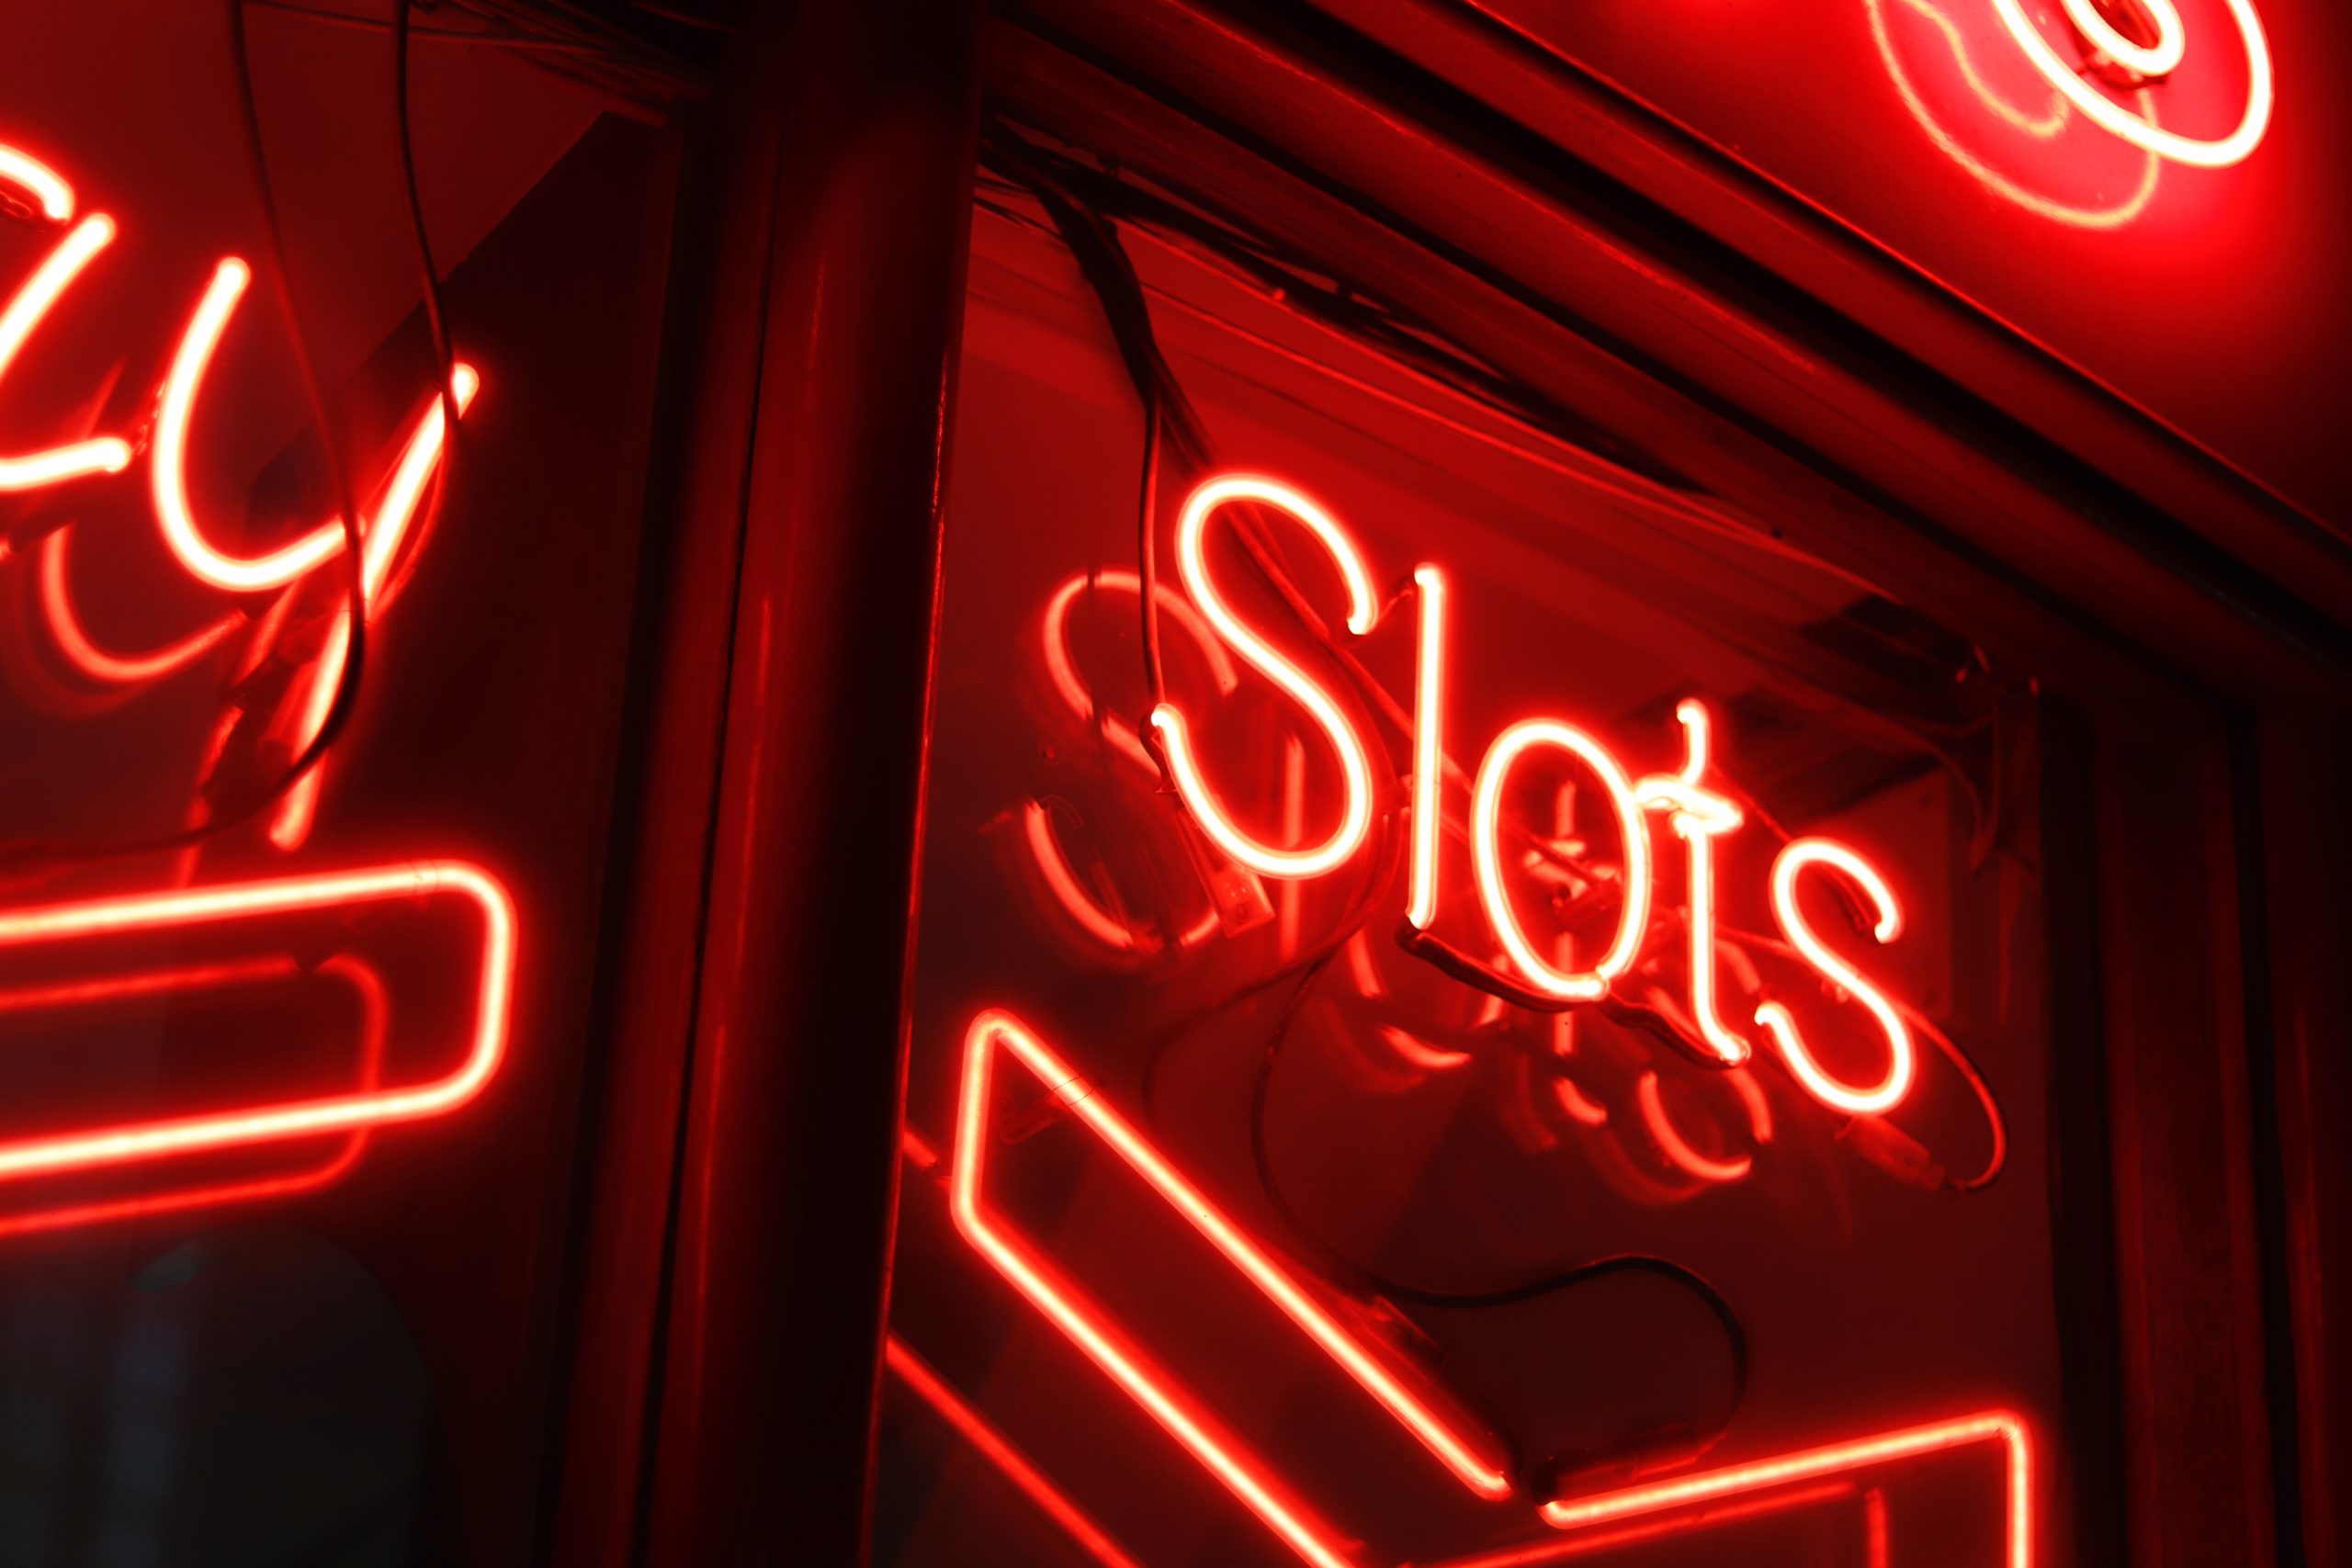 Johnslots and Facts: Interesting Slots Statistics to Impress Your Friends